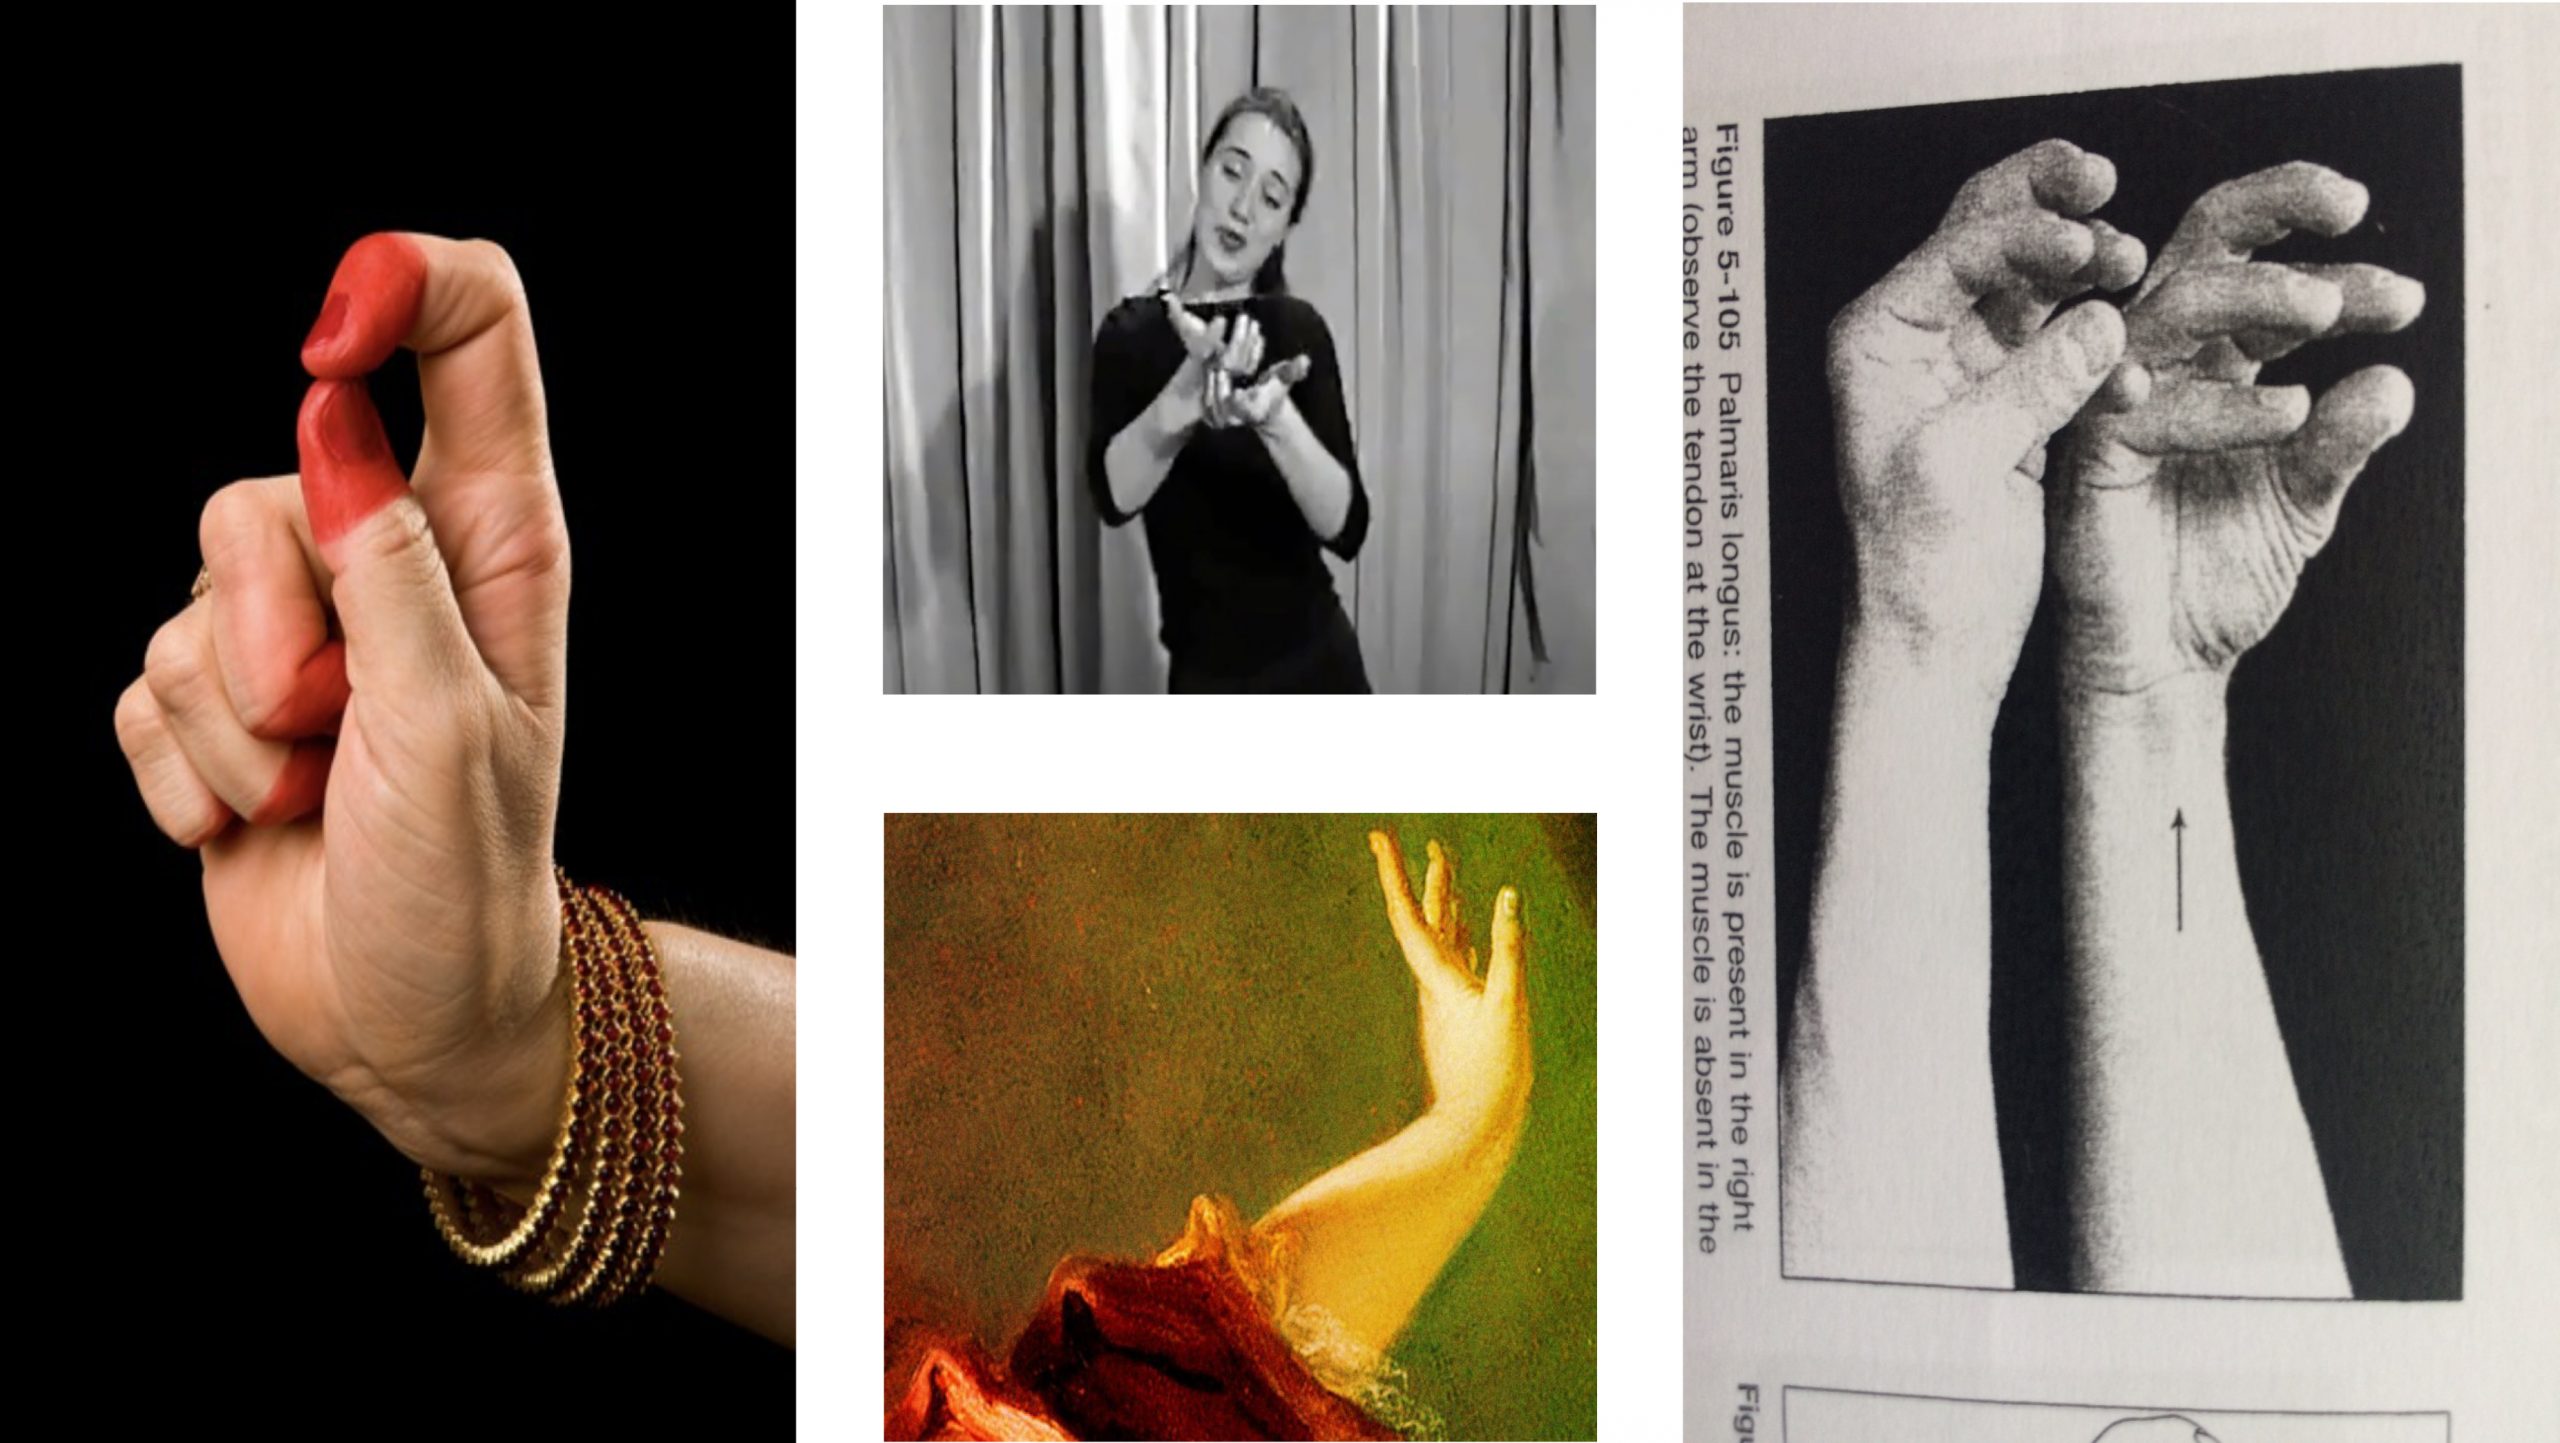 Image collage of different hand gestures, obviously from very different context and eras.